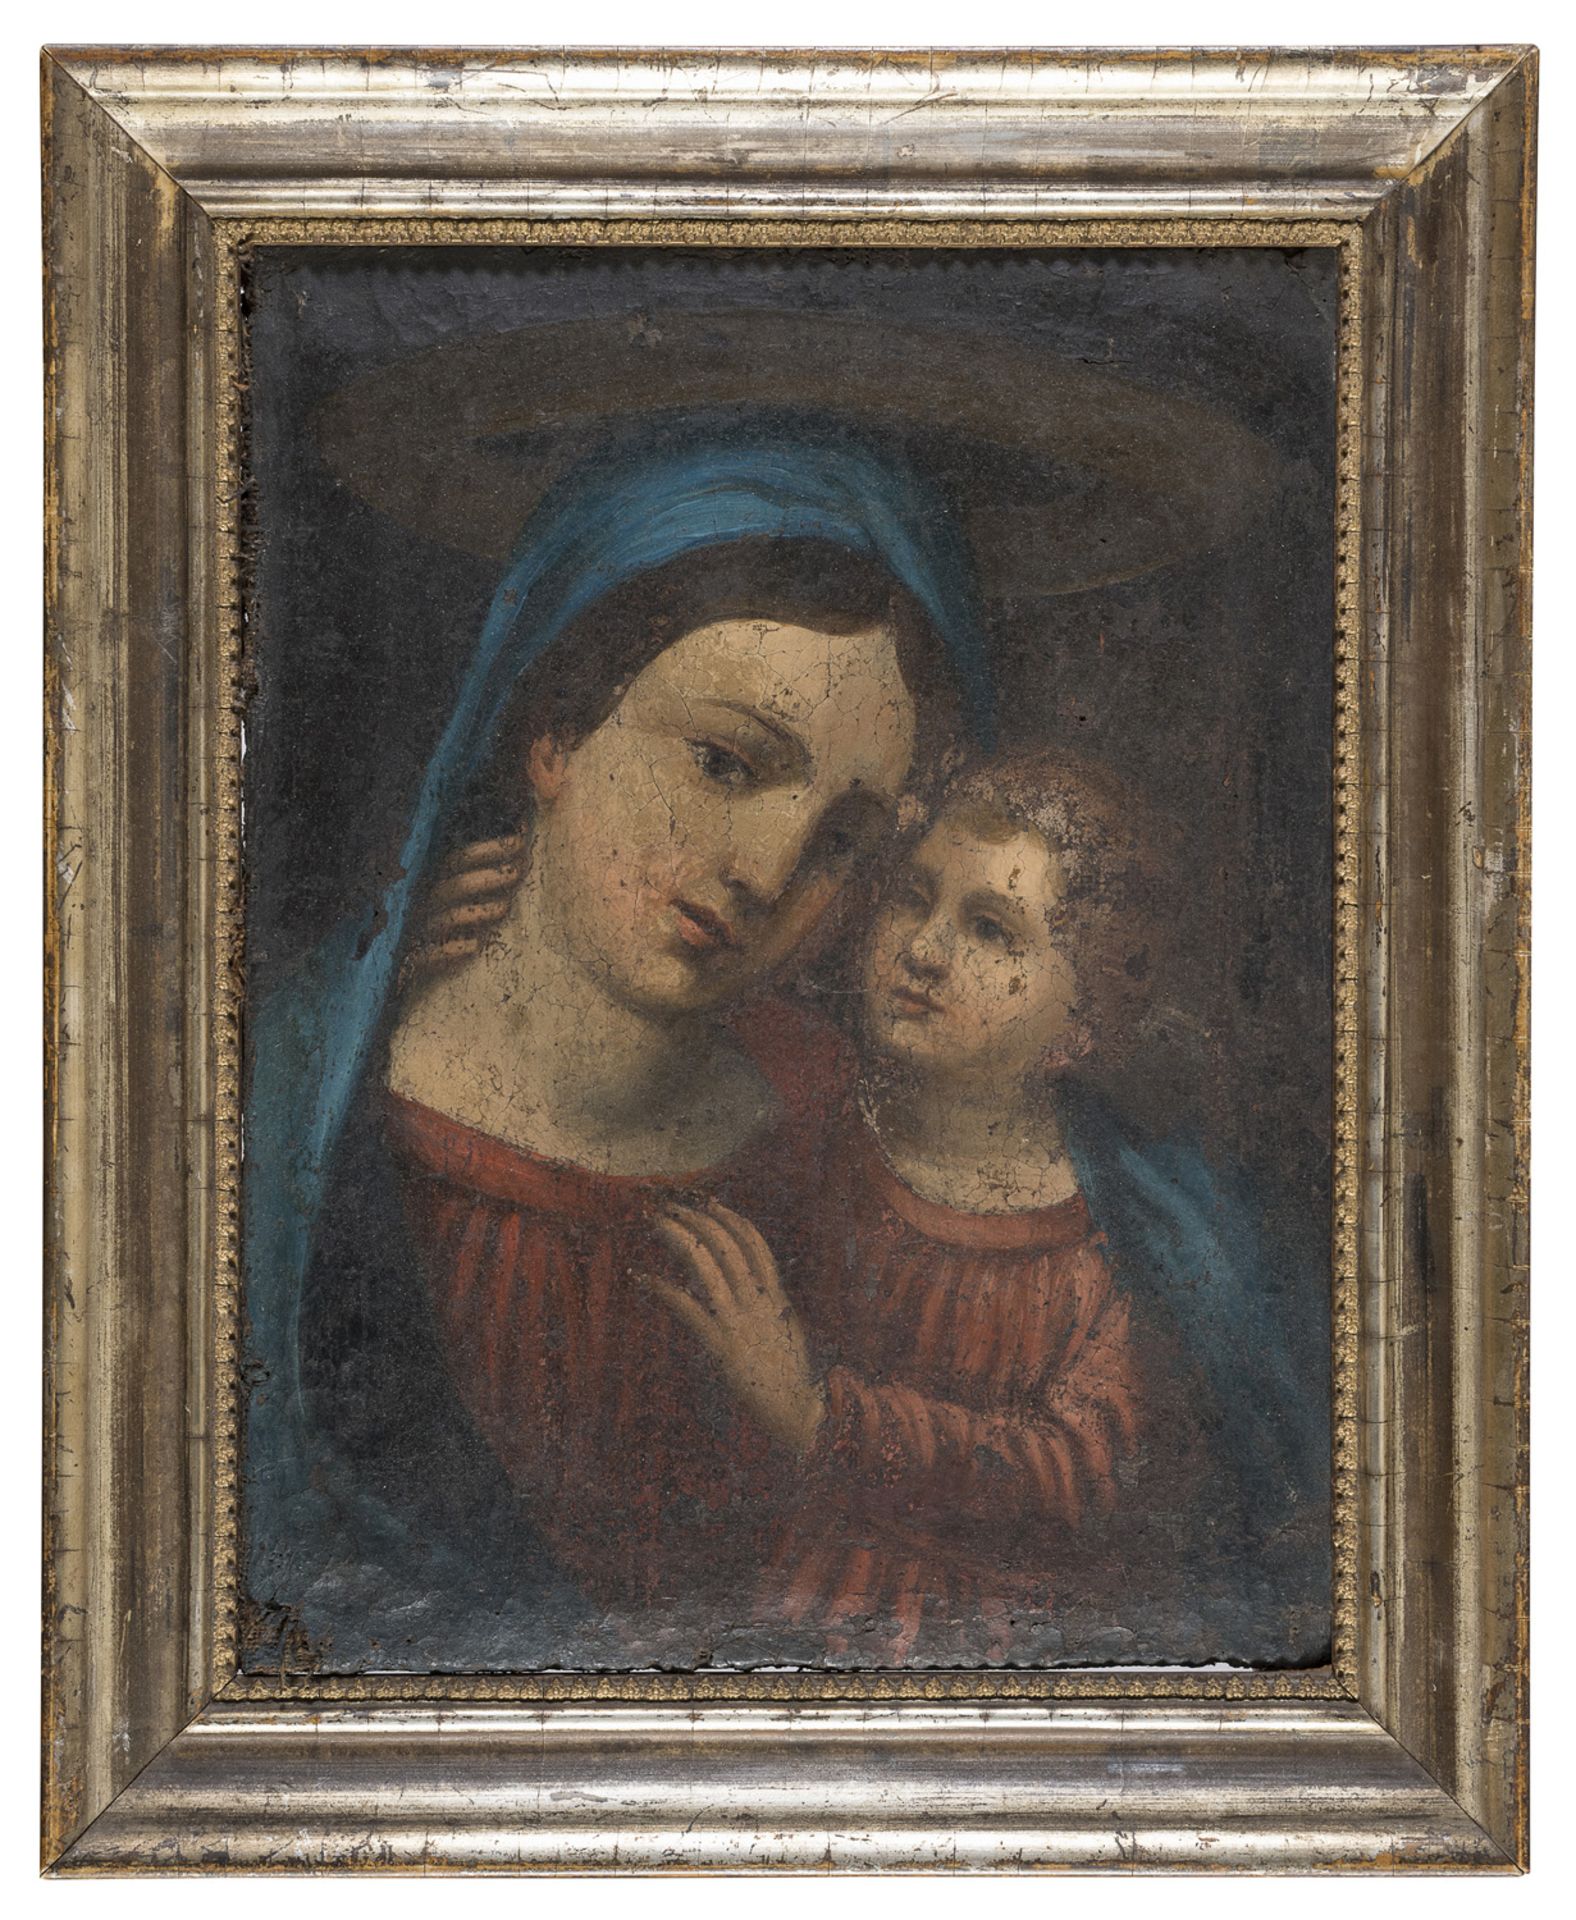 OIL PAINTING MADONNA AND CHILD 19TH CENTURY